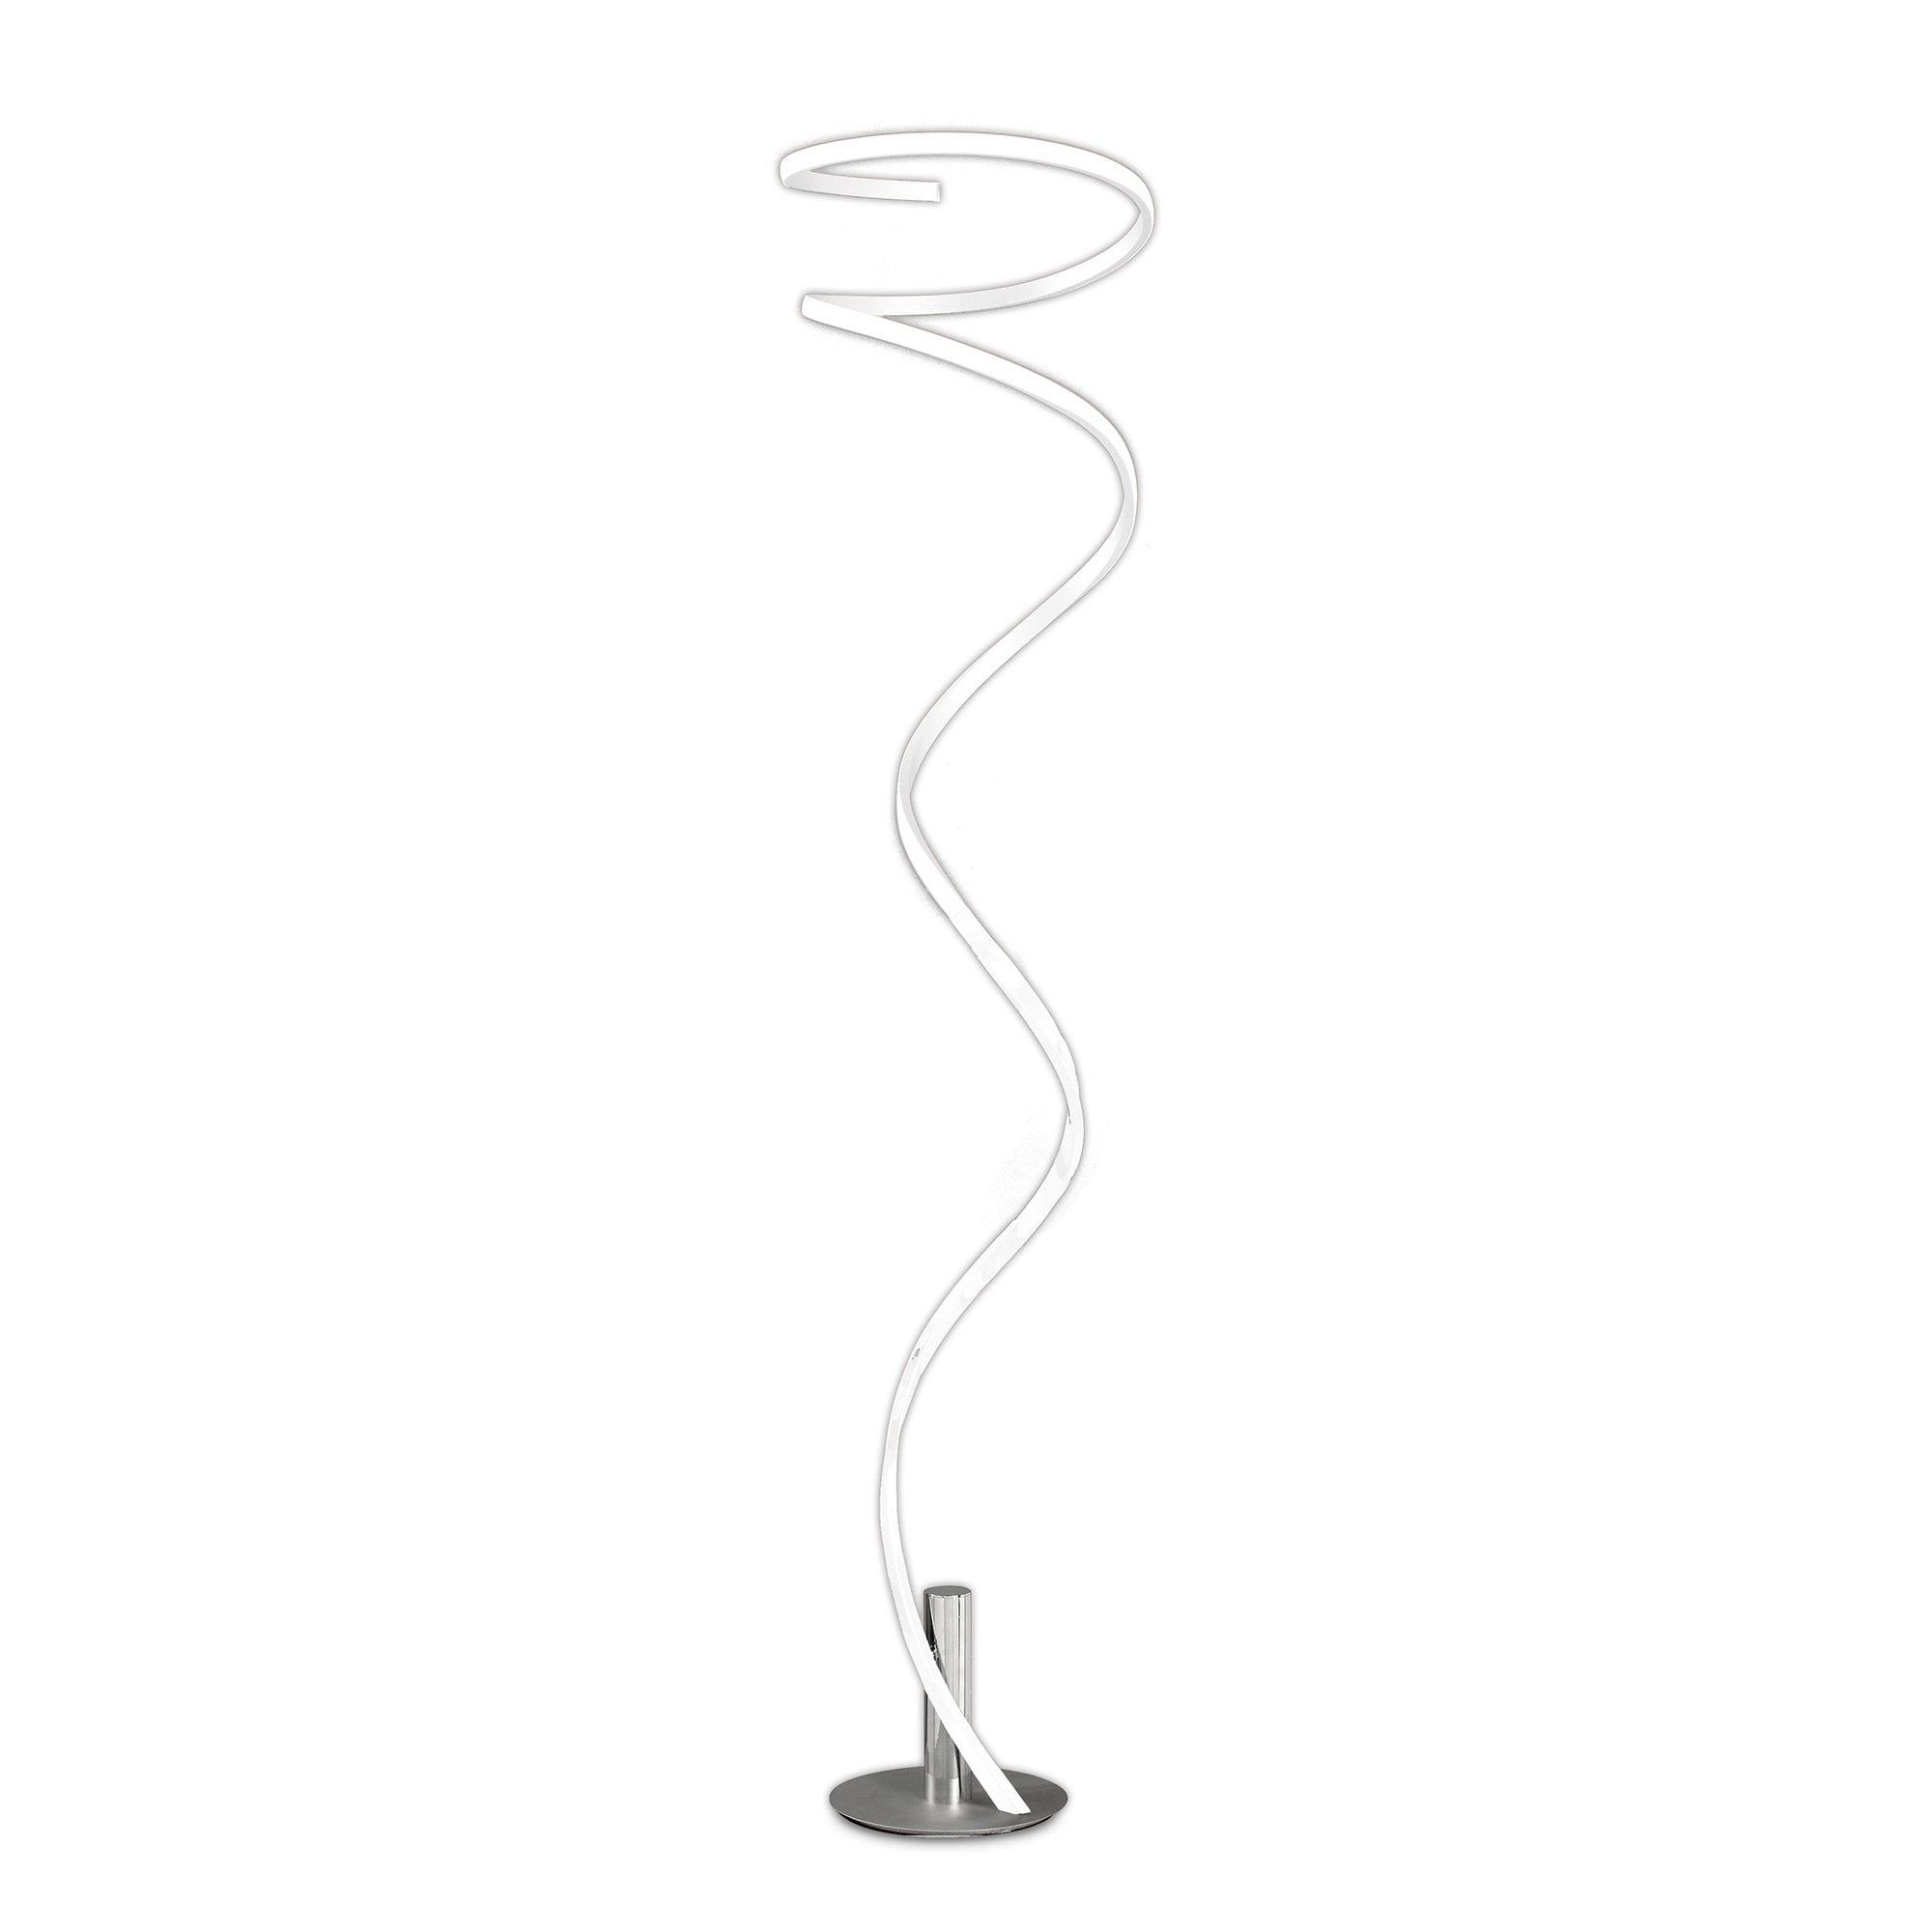 Floor Lamps With Dimmable Led Intended For Recent Mantra M6102 Helix Dimmable Led Floor Lamp In Chrome And White Finish With  Frosted Acrylic (View 5 of 15)